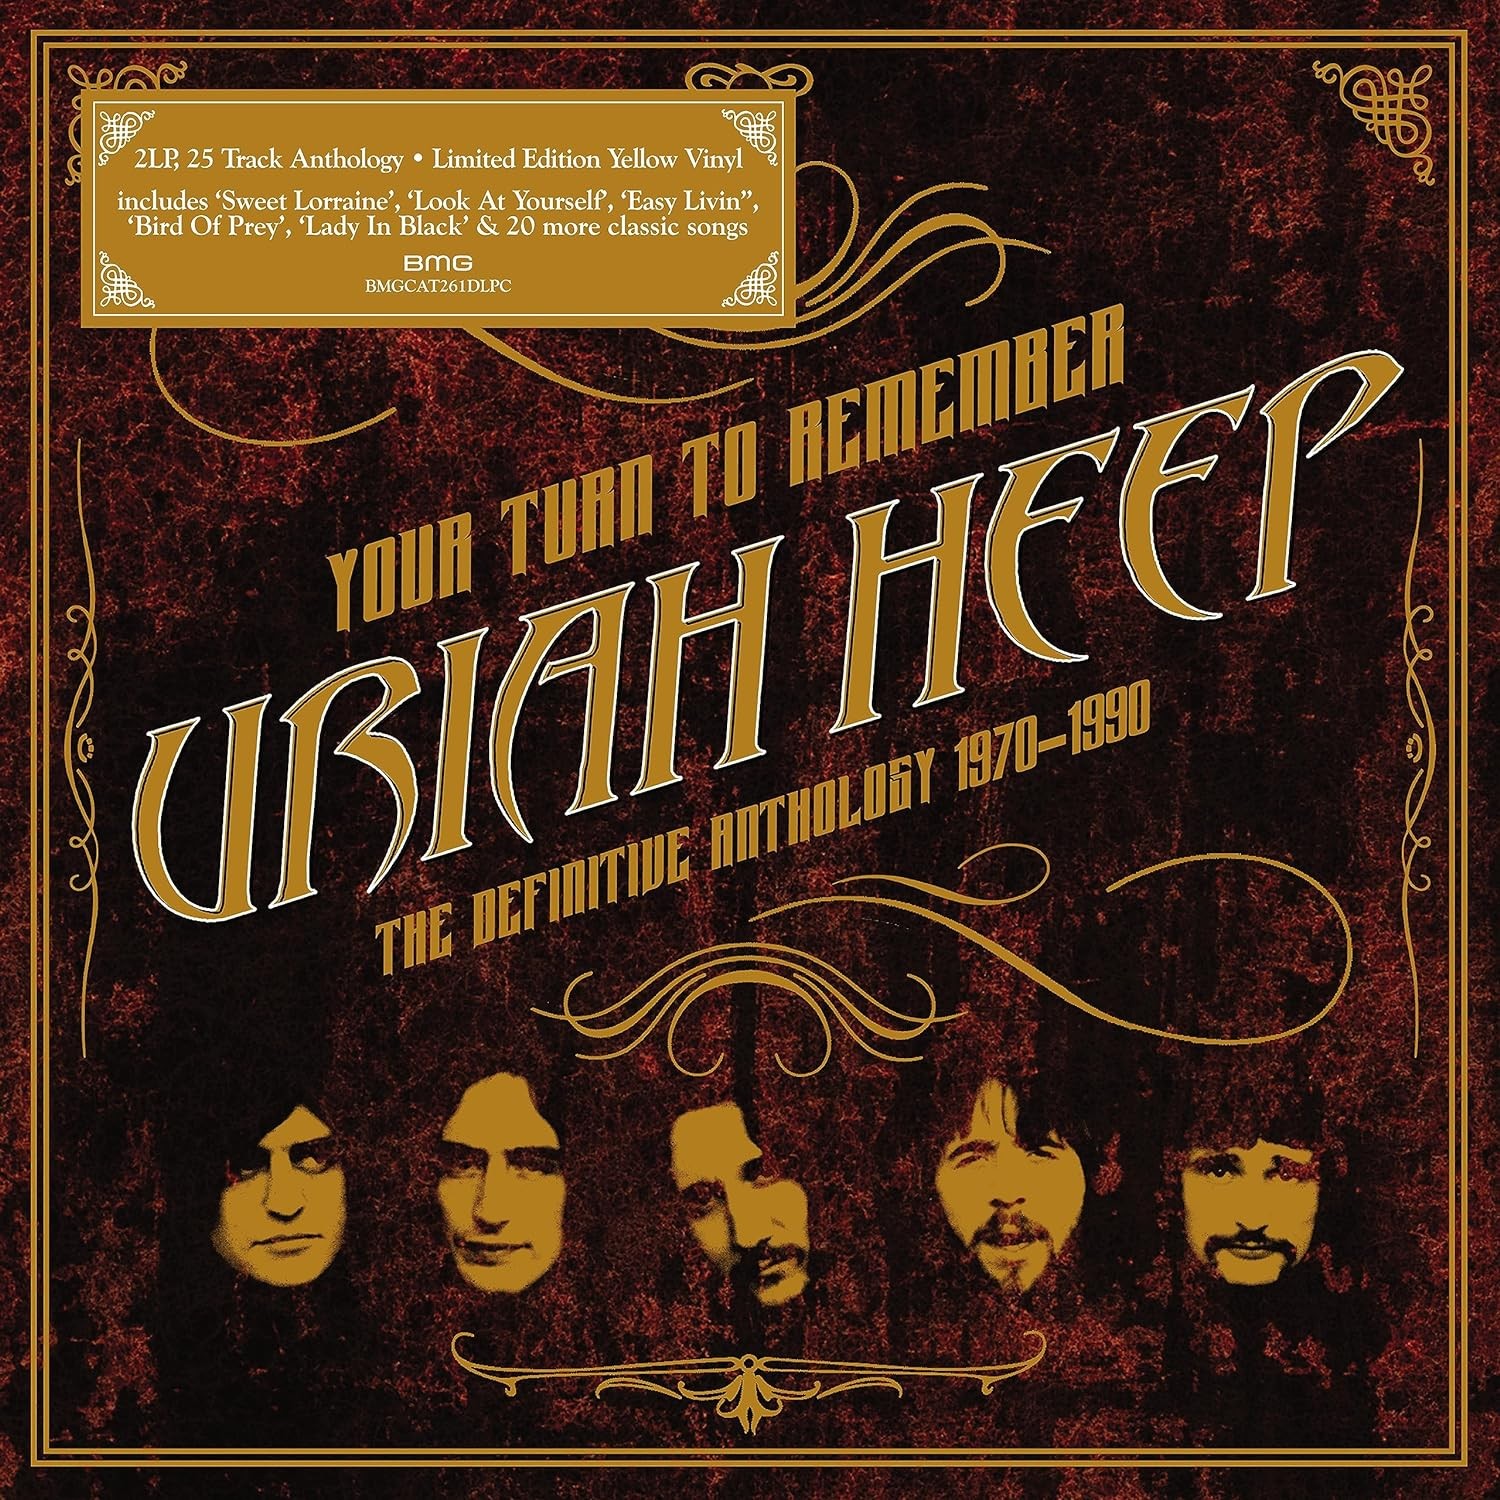 Uriah Heep – Your Turn To Remember: The Definitive Anthology 1970-1990. Coloured Yellow Vinyl (2 LP)